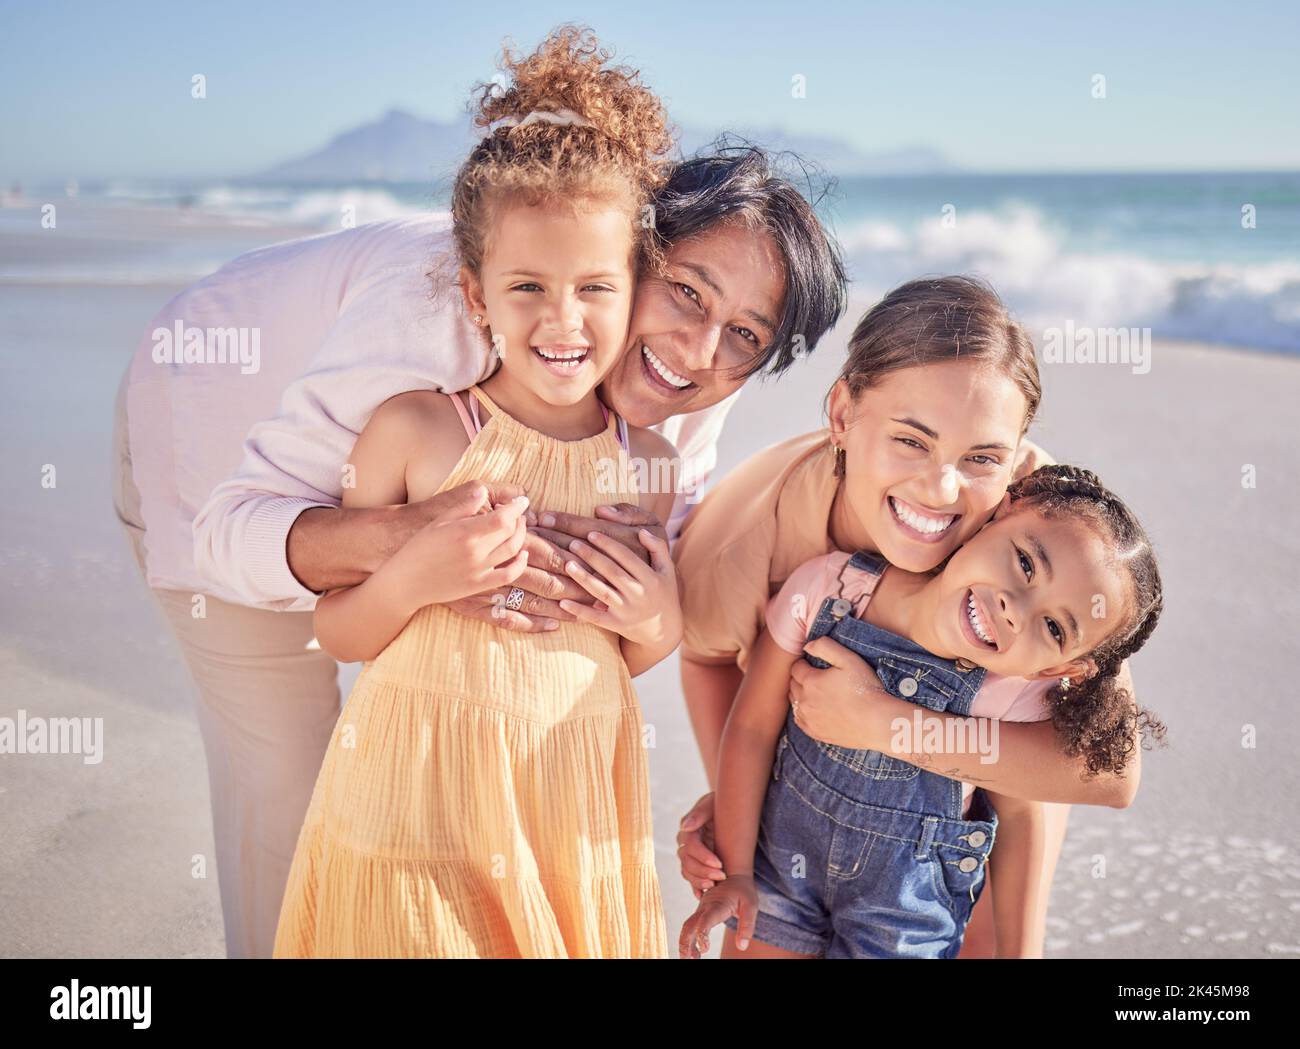 Family, beach vacation and happy children with their mother and grandma out for fun, happiness and bonding on an adventure on a summer trip. Portrait Stock Photo